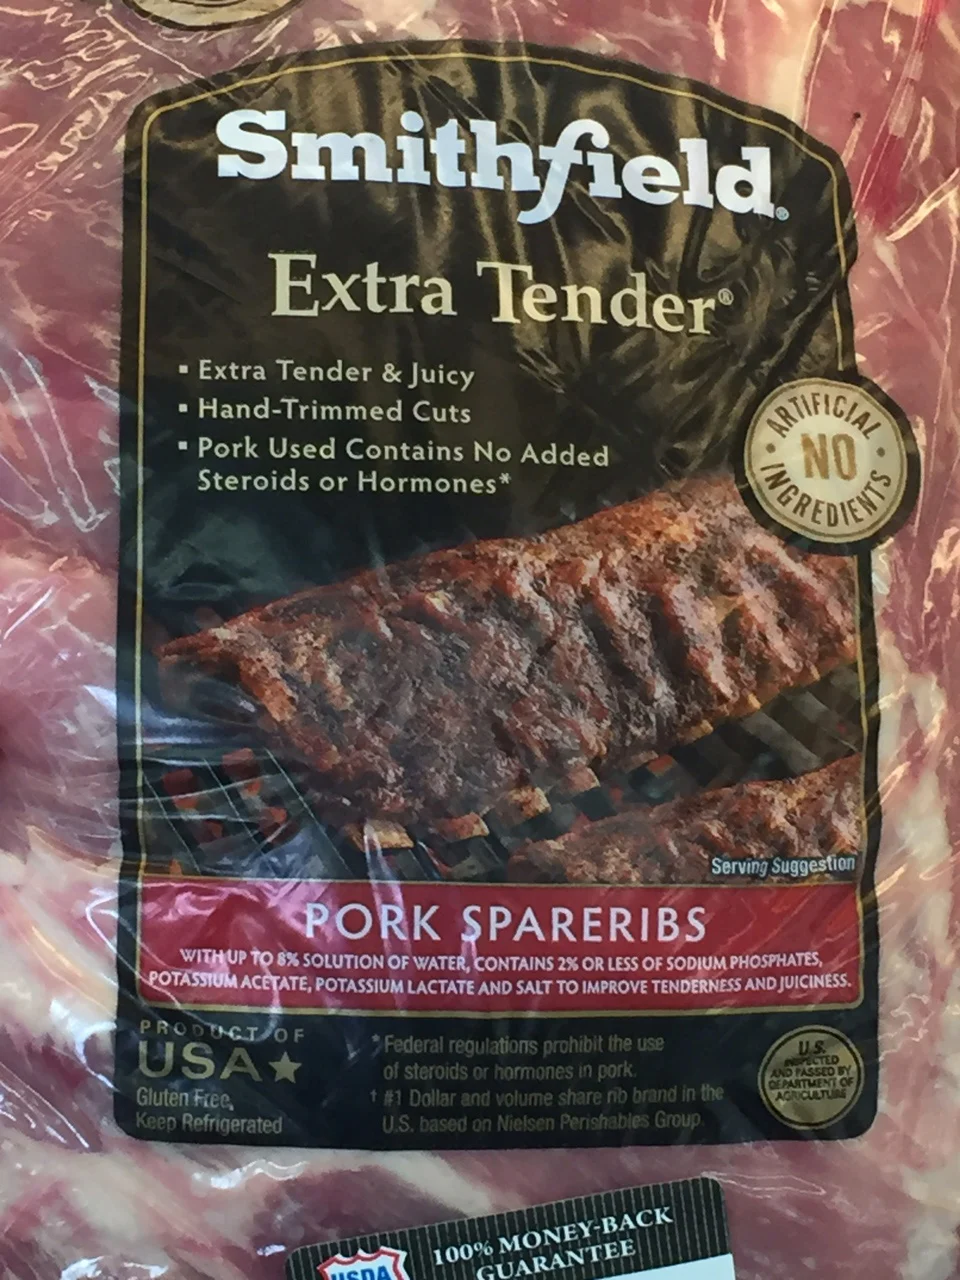 Find Smithfield Fresh Pork Ribs in the Pork Section of the Meat Case in Walmart